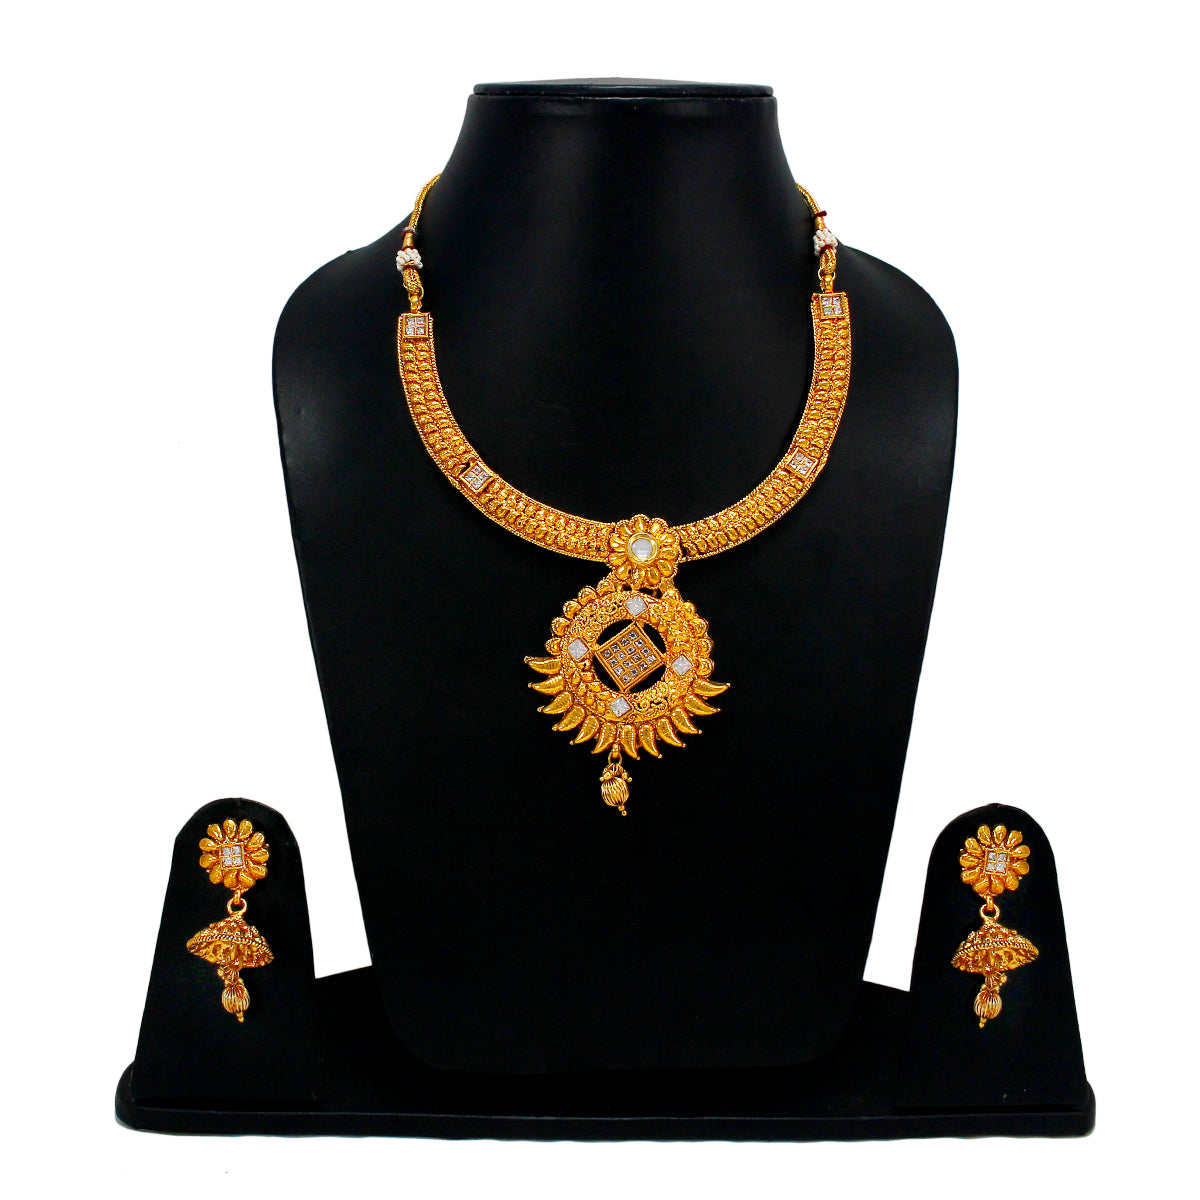 Royal Gold Plated Designer Kundan Stone Floral Rani Har Design Necklace and Earrings with White White Stones